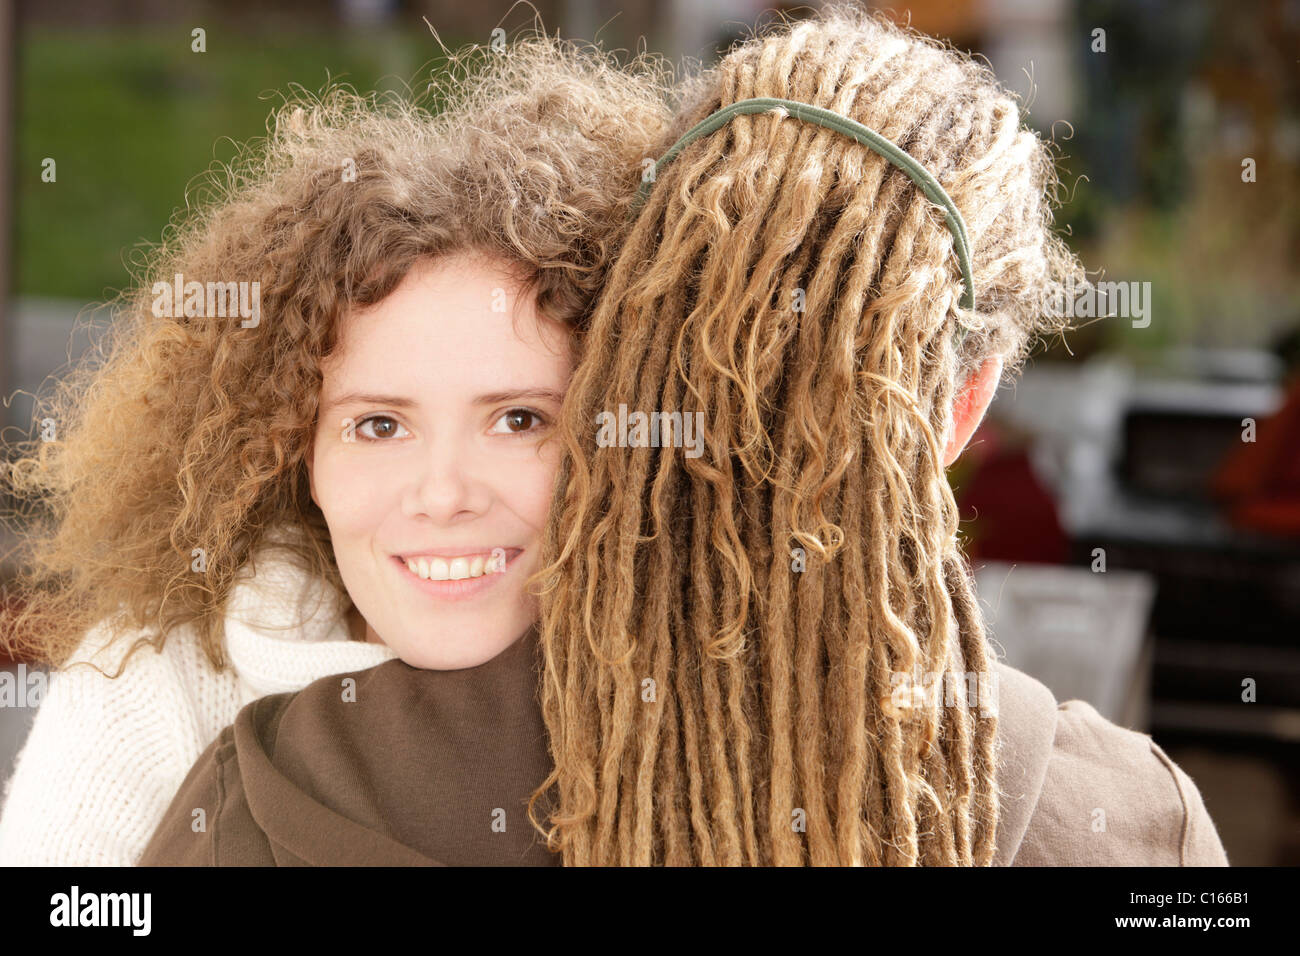 Woman With Curly Hair Smiling And A Man With Dreadlocks